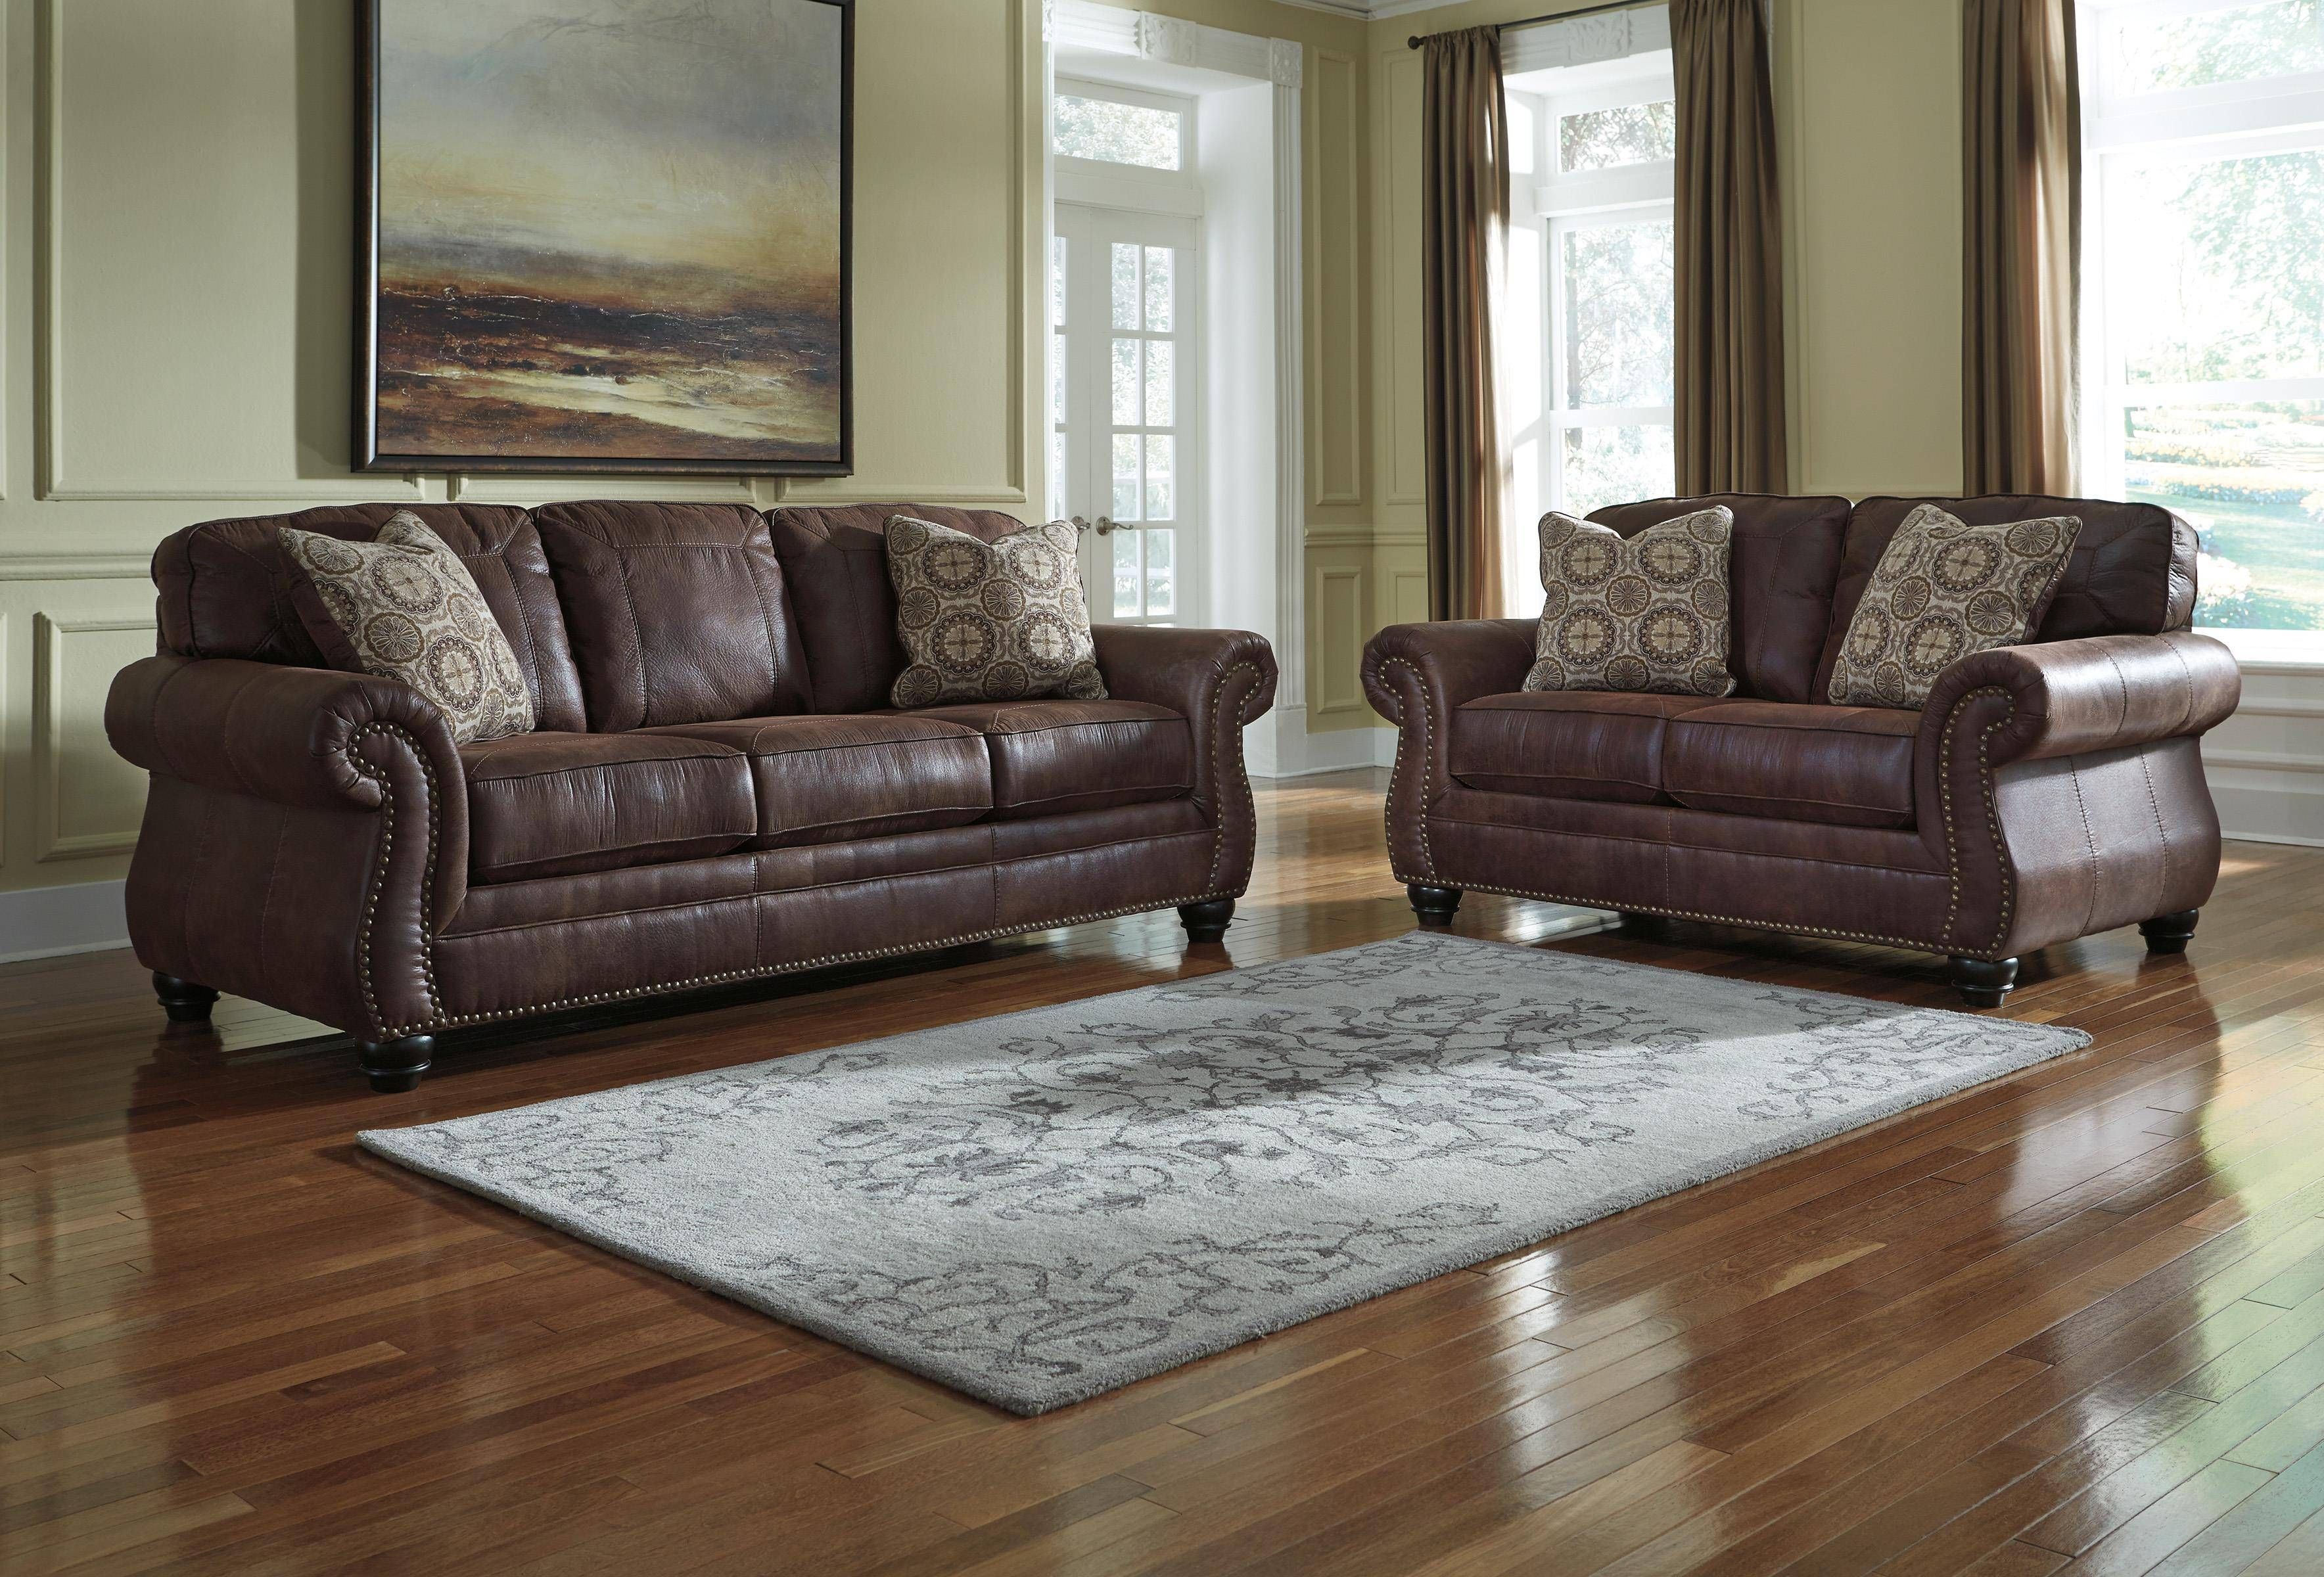 Faux Leather Sofa With Rolled Arms And Nailhead Trimbenchcraft Throughout Benchcraft Leather Sofas (Photo 4 of 15)